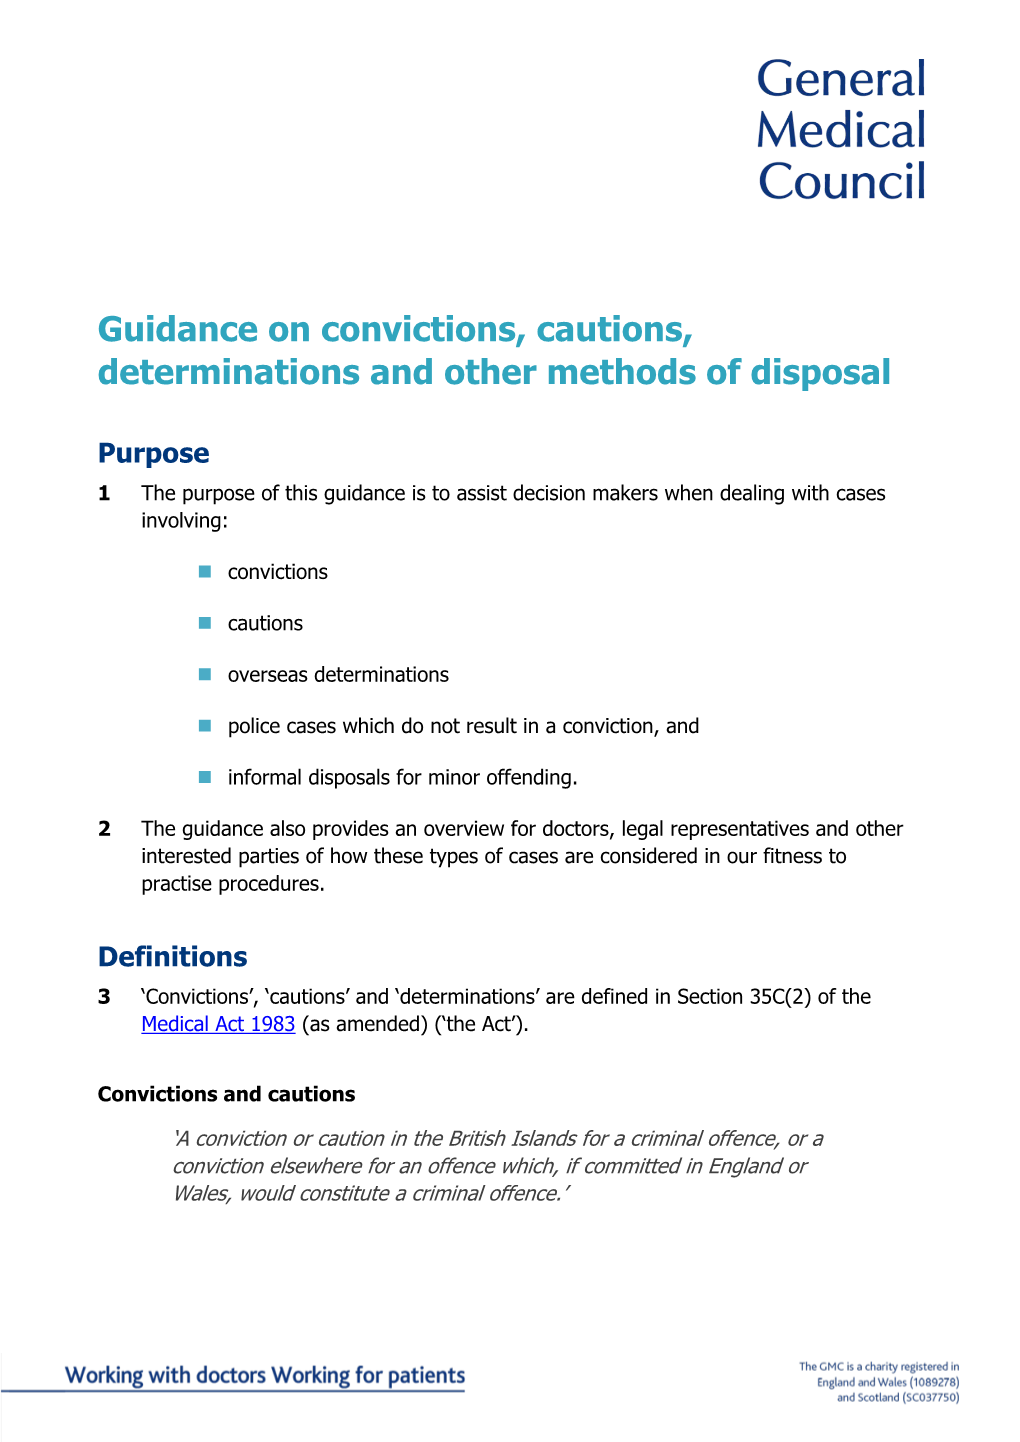 Guidance on Convictions Caution